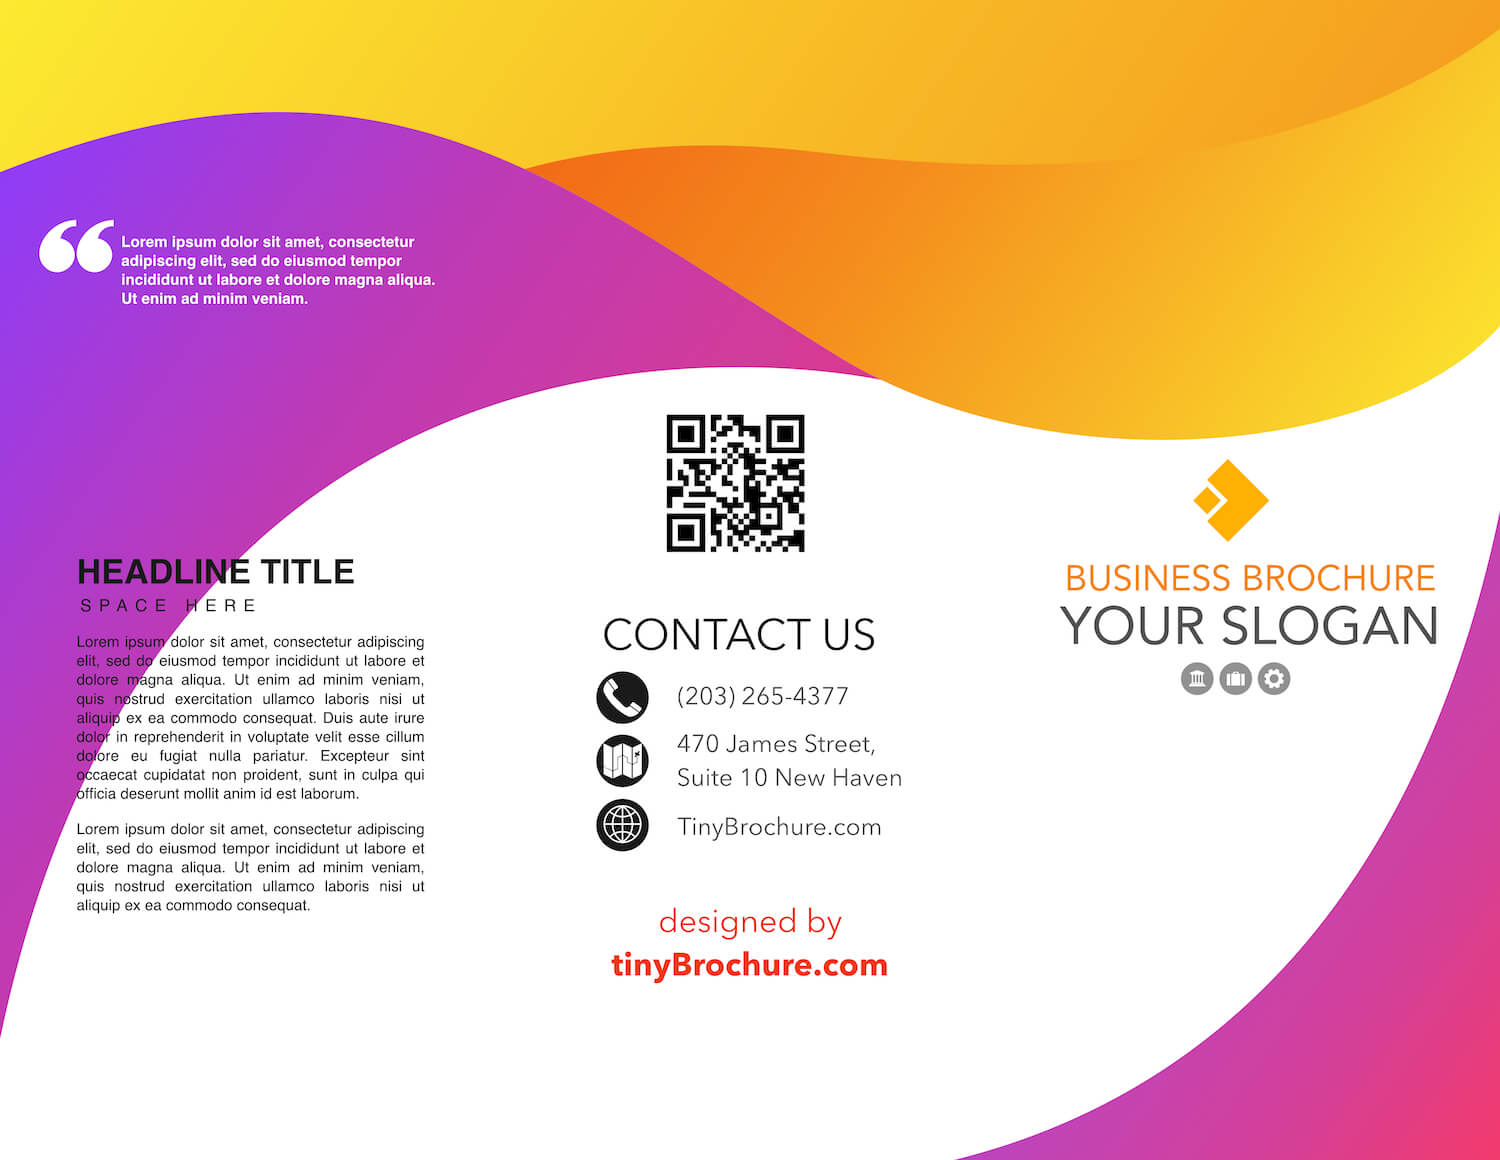 How To Make A Tri Fold Brochure In Google Docs Pertaining To Google Docs Tri Fold Brochure Template